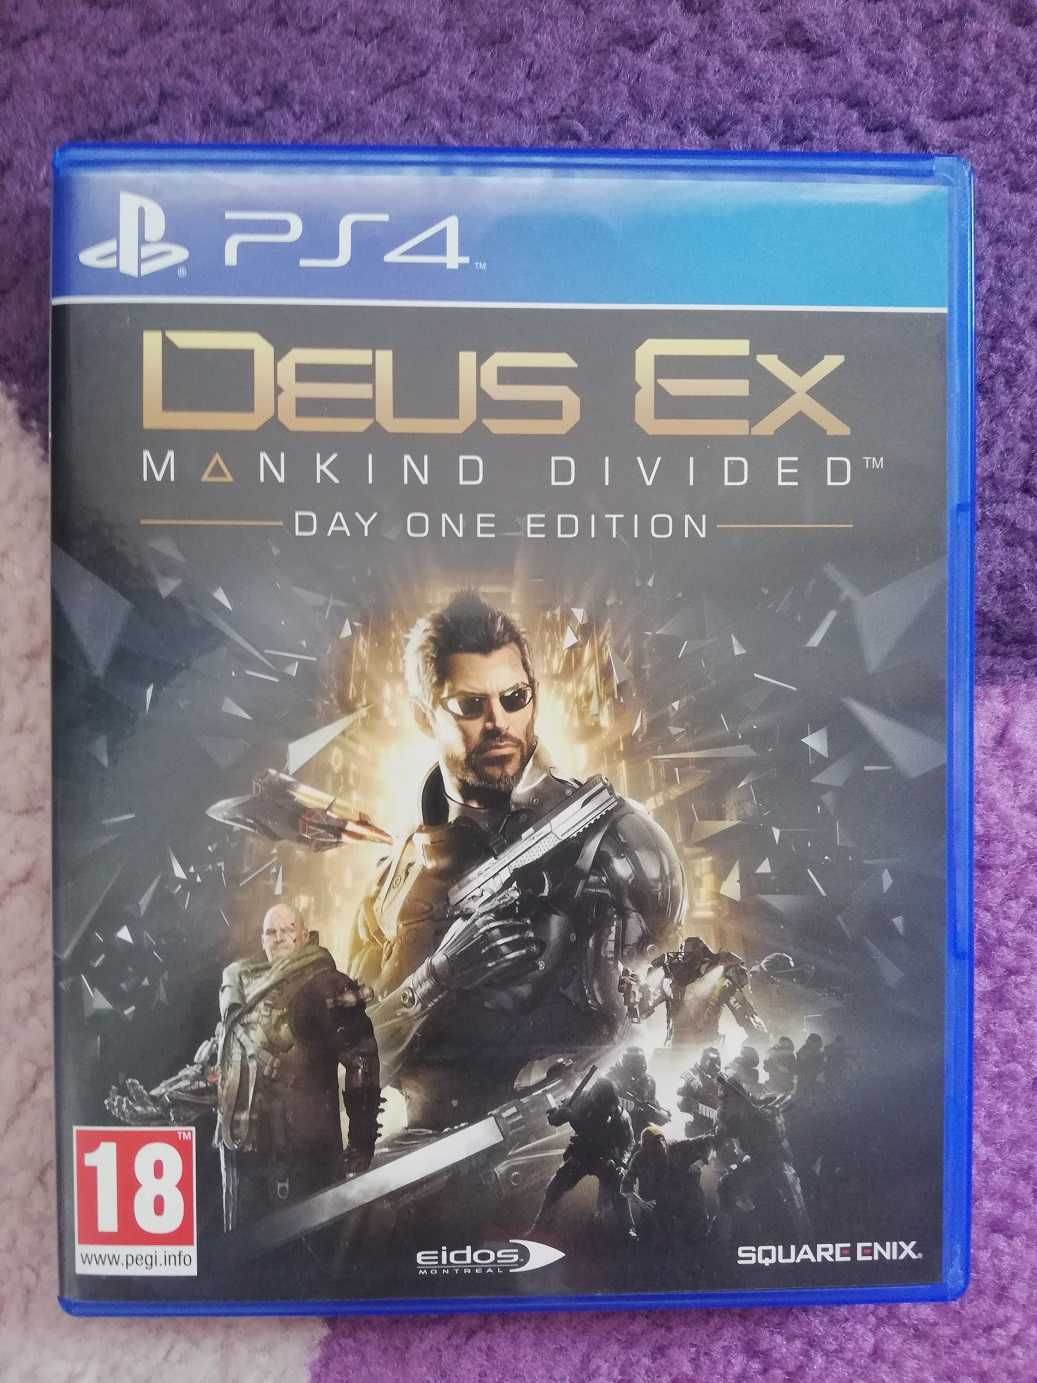 DEUS EX - Mankind divided - Day One Edition - PS4